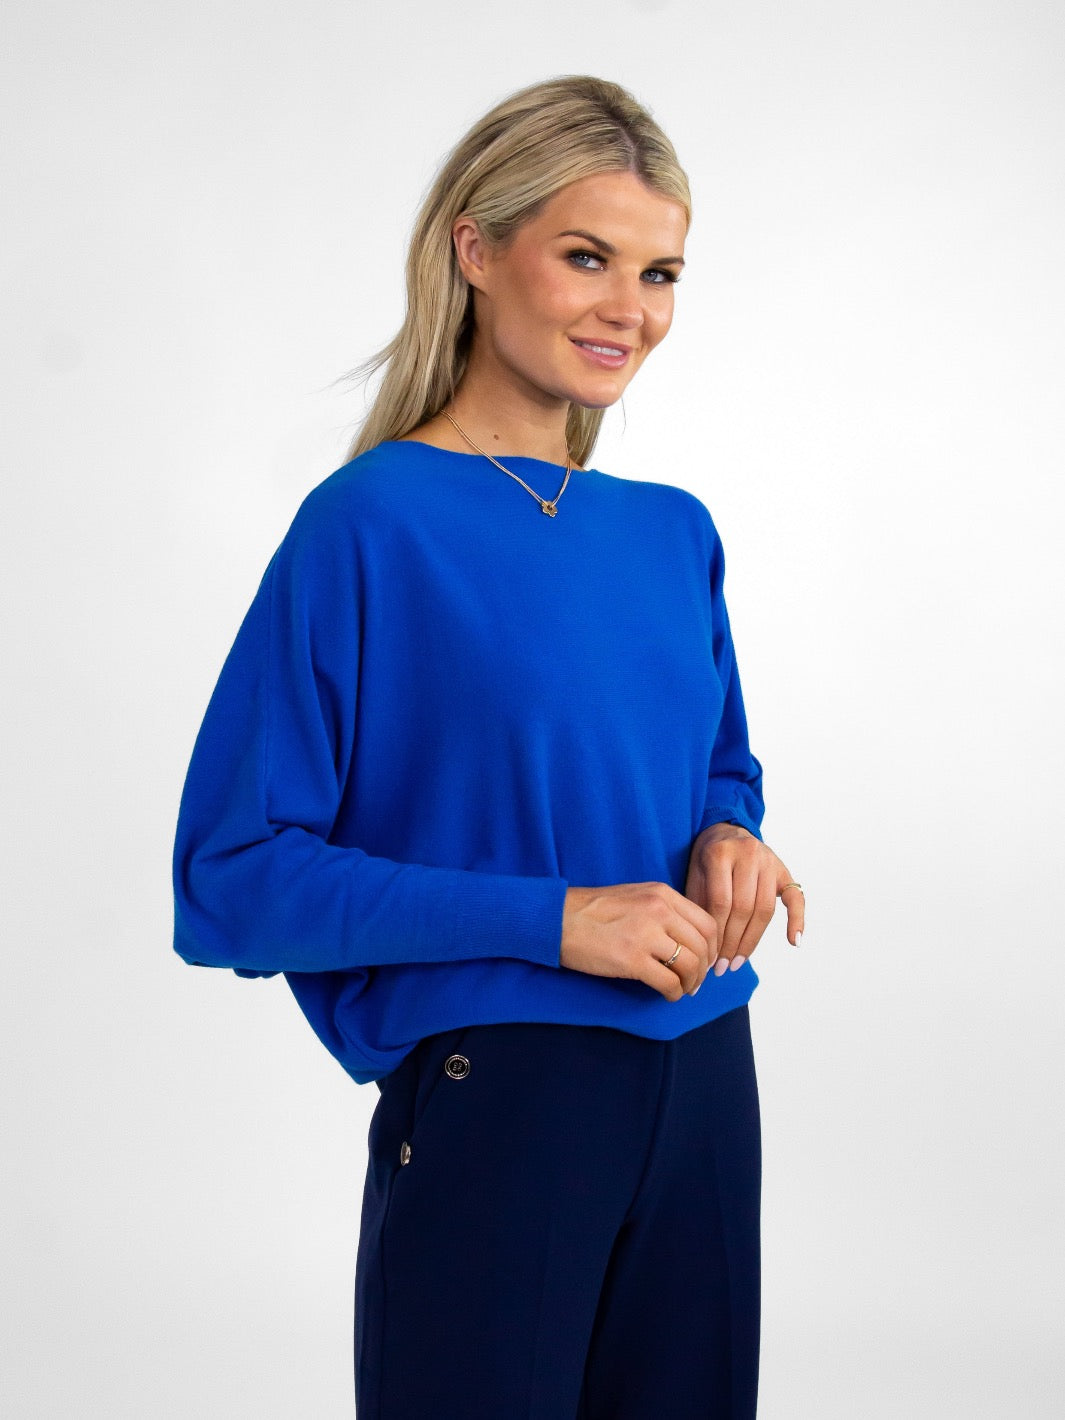 Kate & Pippa Milano Batwing Knit In Blue-Nicola Ross